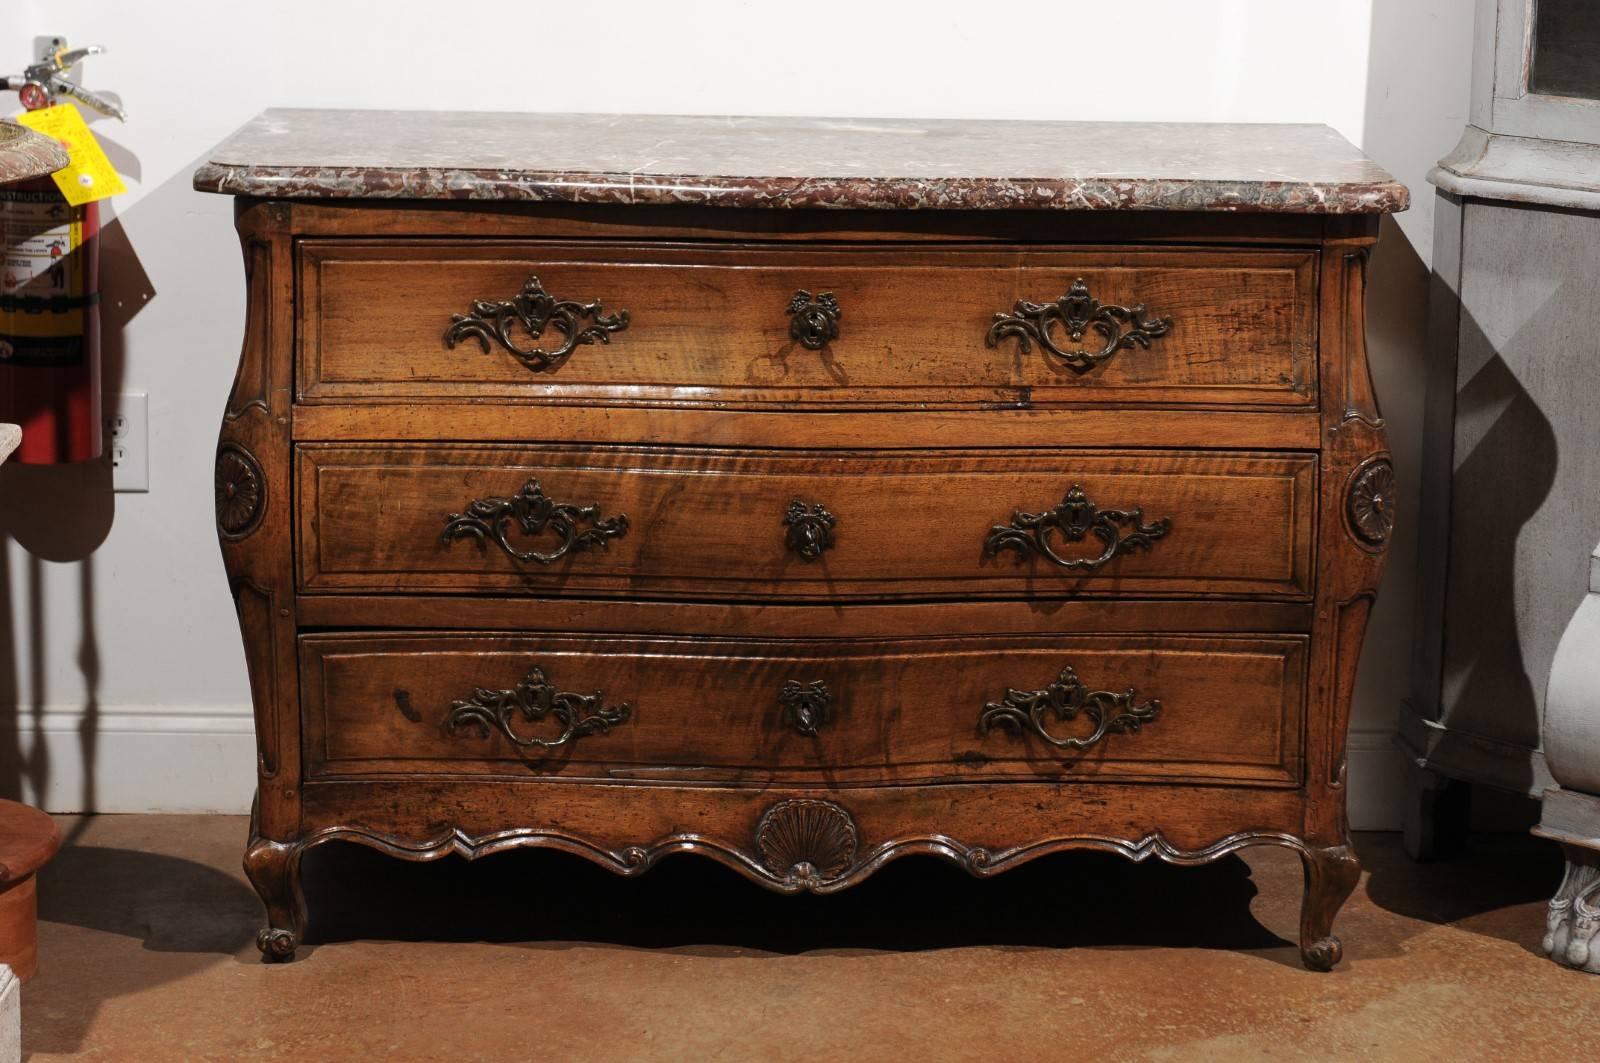 A French period Louis XV walnut Provençale three-drawer commode from the mid-18th century, with delicate serpentine front and red marble top. Born in the Southern region of Provence during the Age of Enlightenment, this exquisite French Louis XV